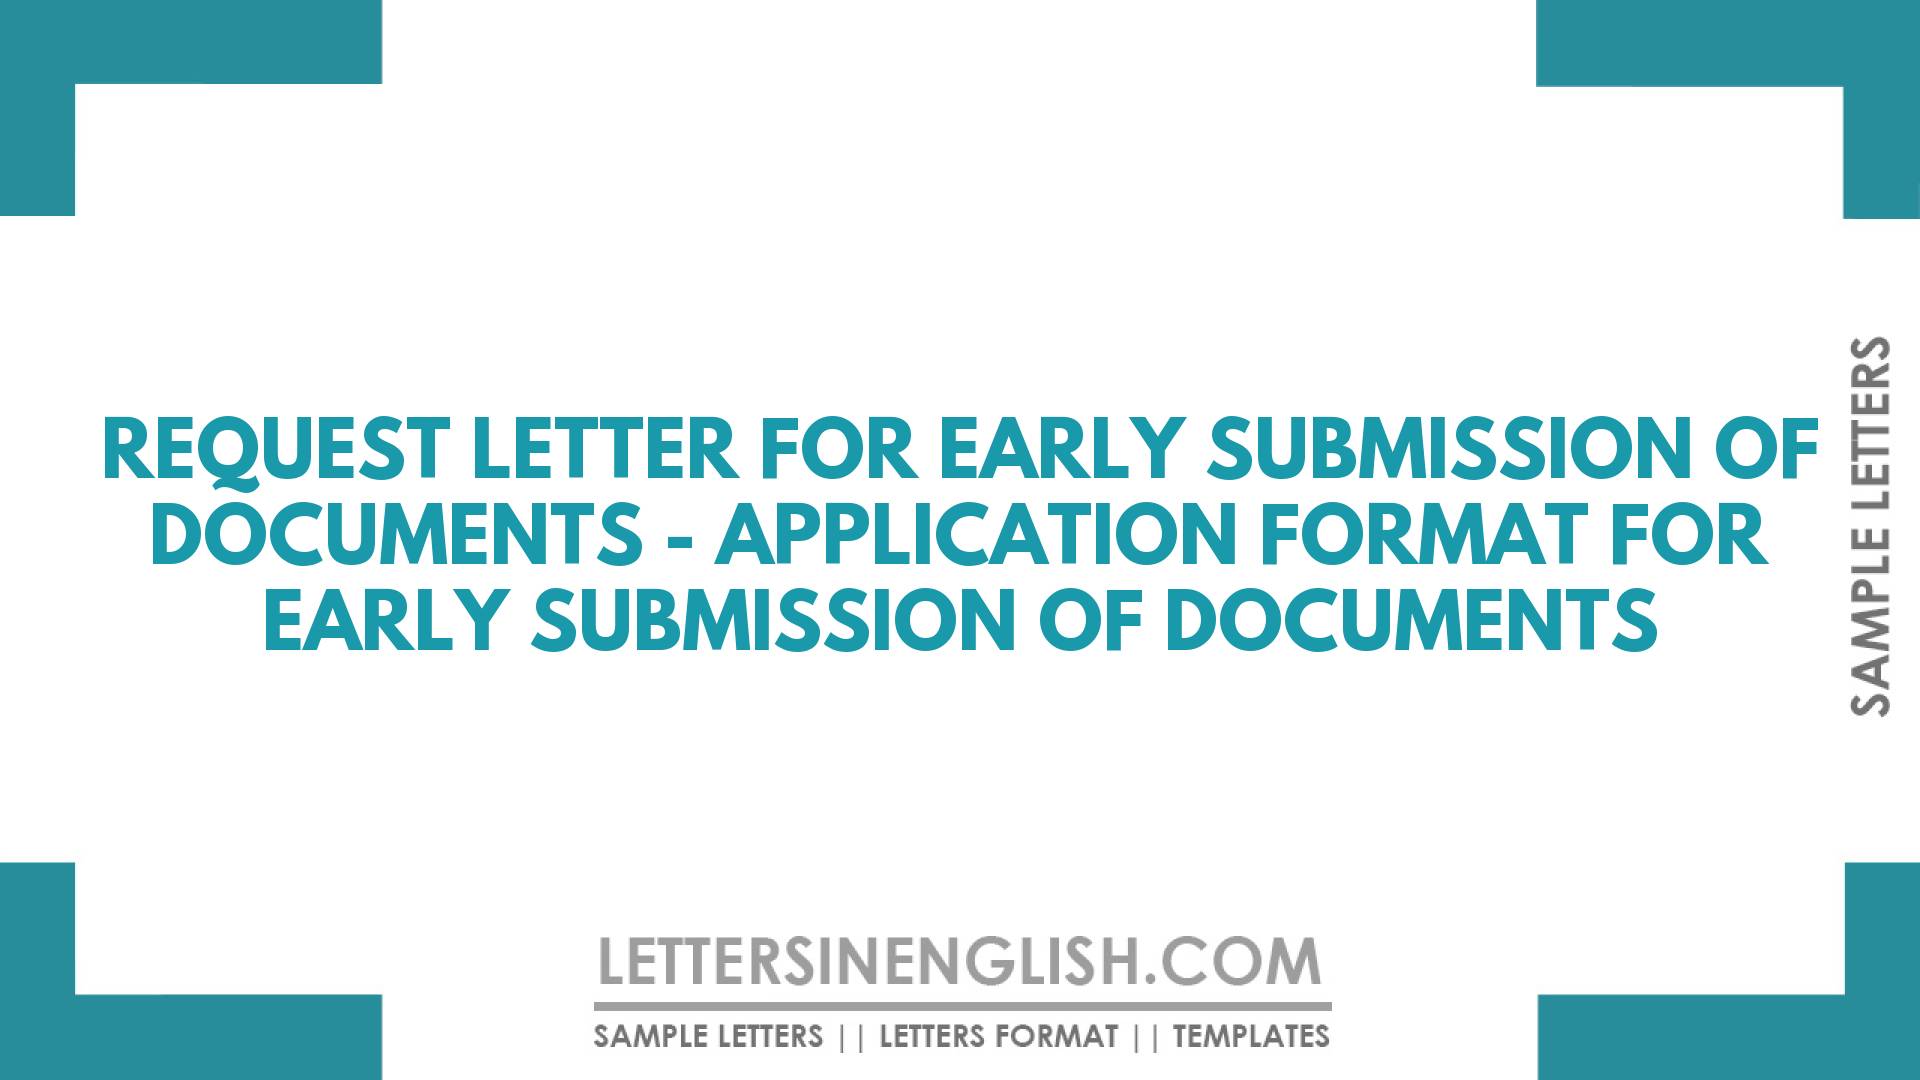 Request Letter for Early Submission of Documents – Application Format for Early Submission of Documents